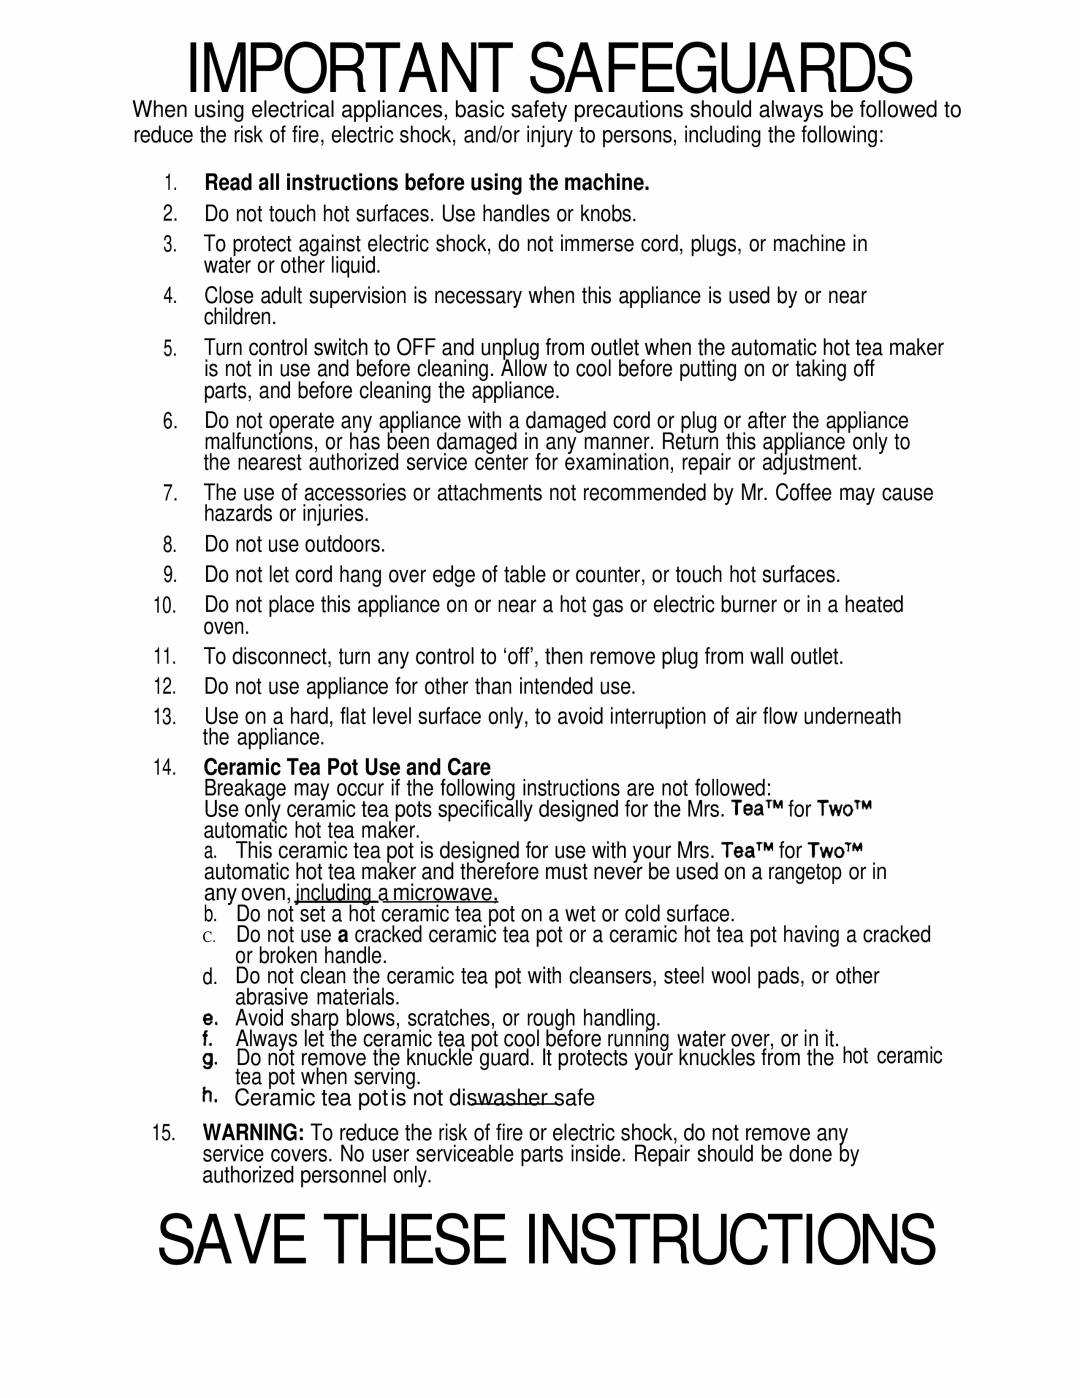 Sunbeam HTM11 Important Safeguards, Save These Instructions, Read all instructions before using the machine 